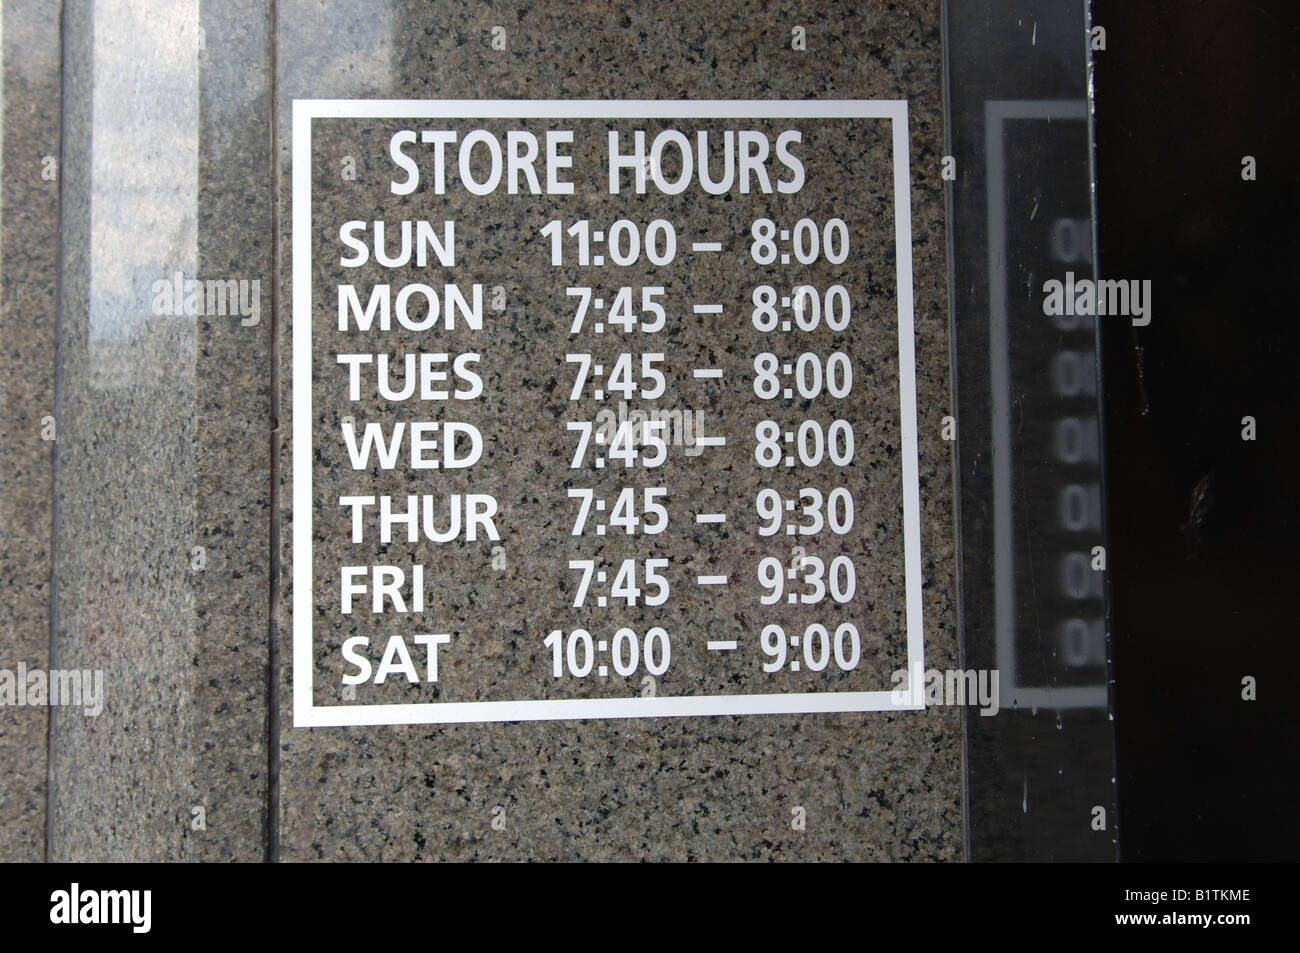 Store hours sign for Century 21 Department store in Lower Manhattan Stock Photo